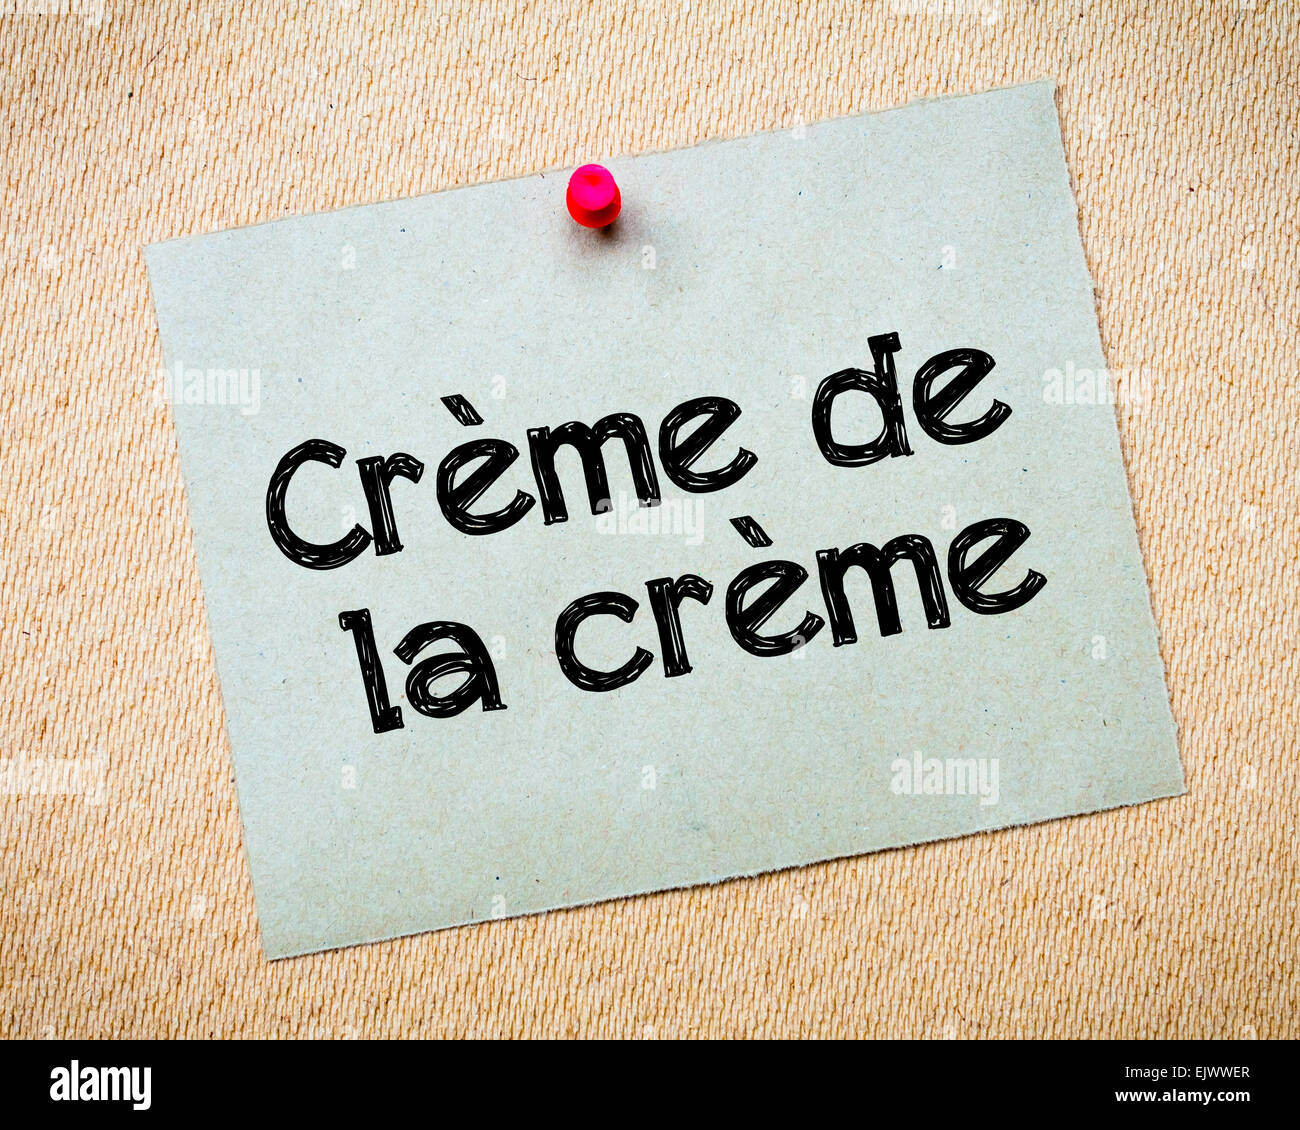 Creme de la creme Message. Recycled paper note pinned on cork board. Concept Image Stock Photo